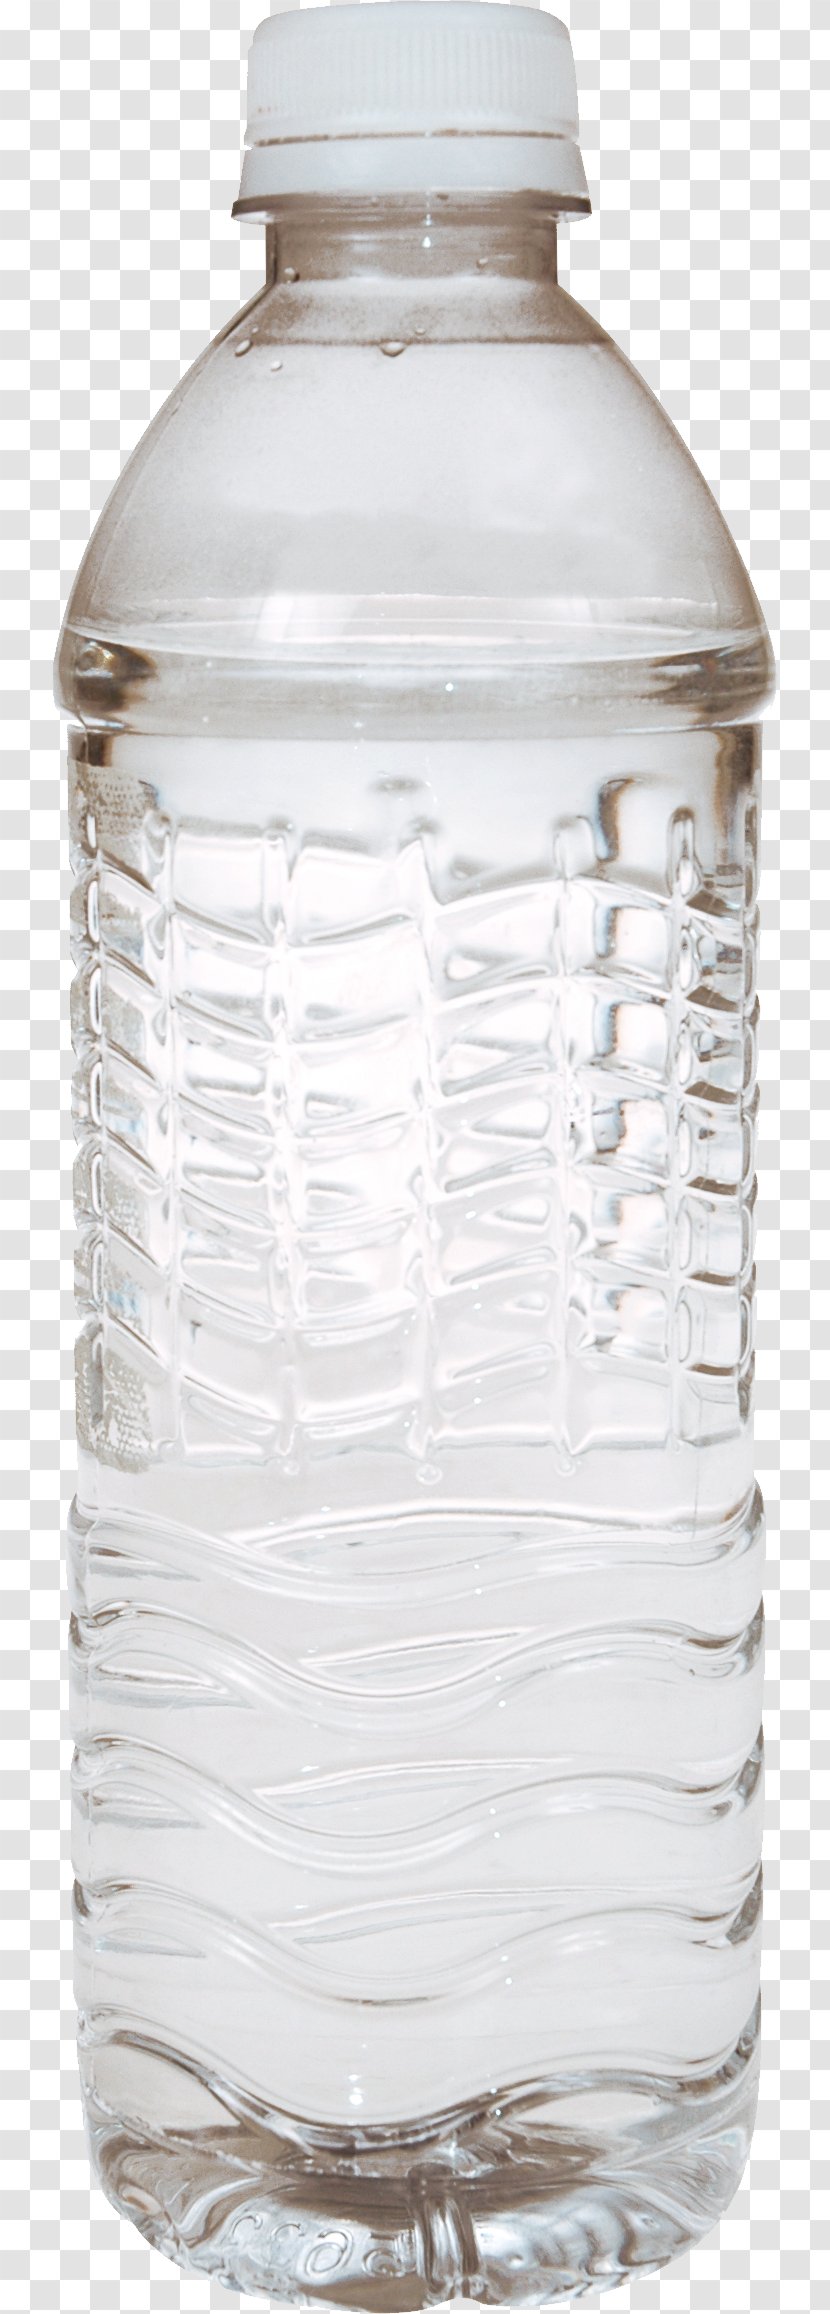 Water Bottle Plastic - Food Storage Containers - Image Transparent PNG